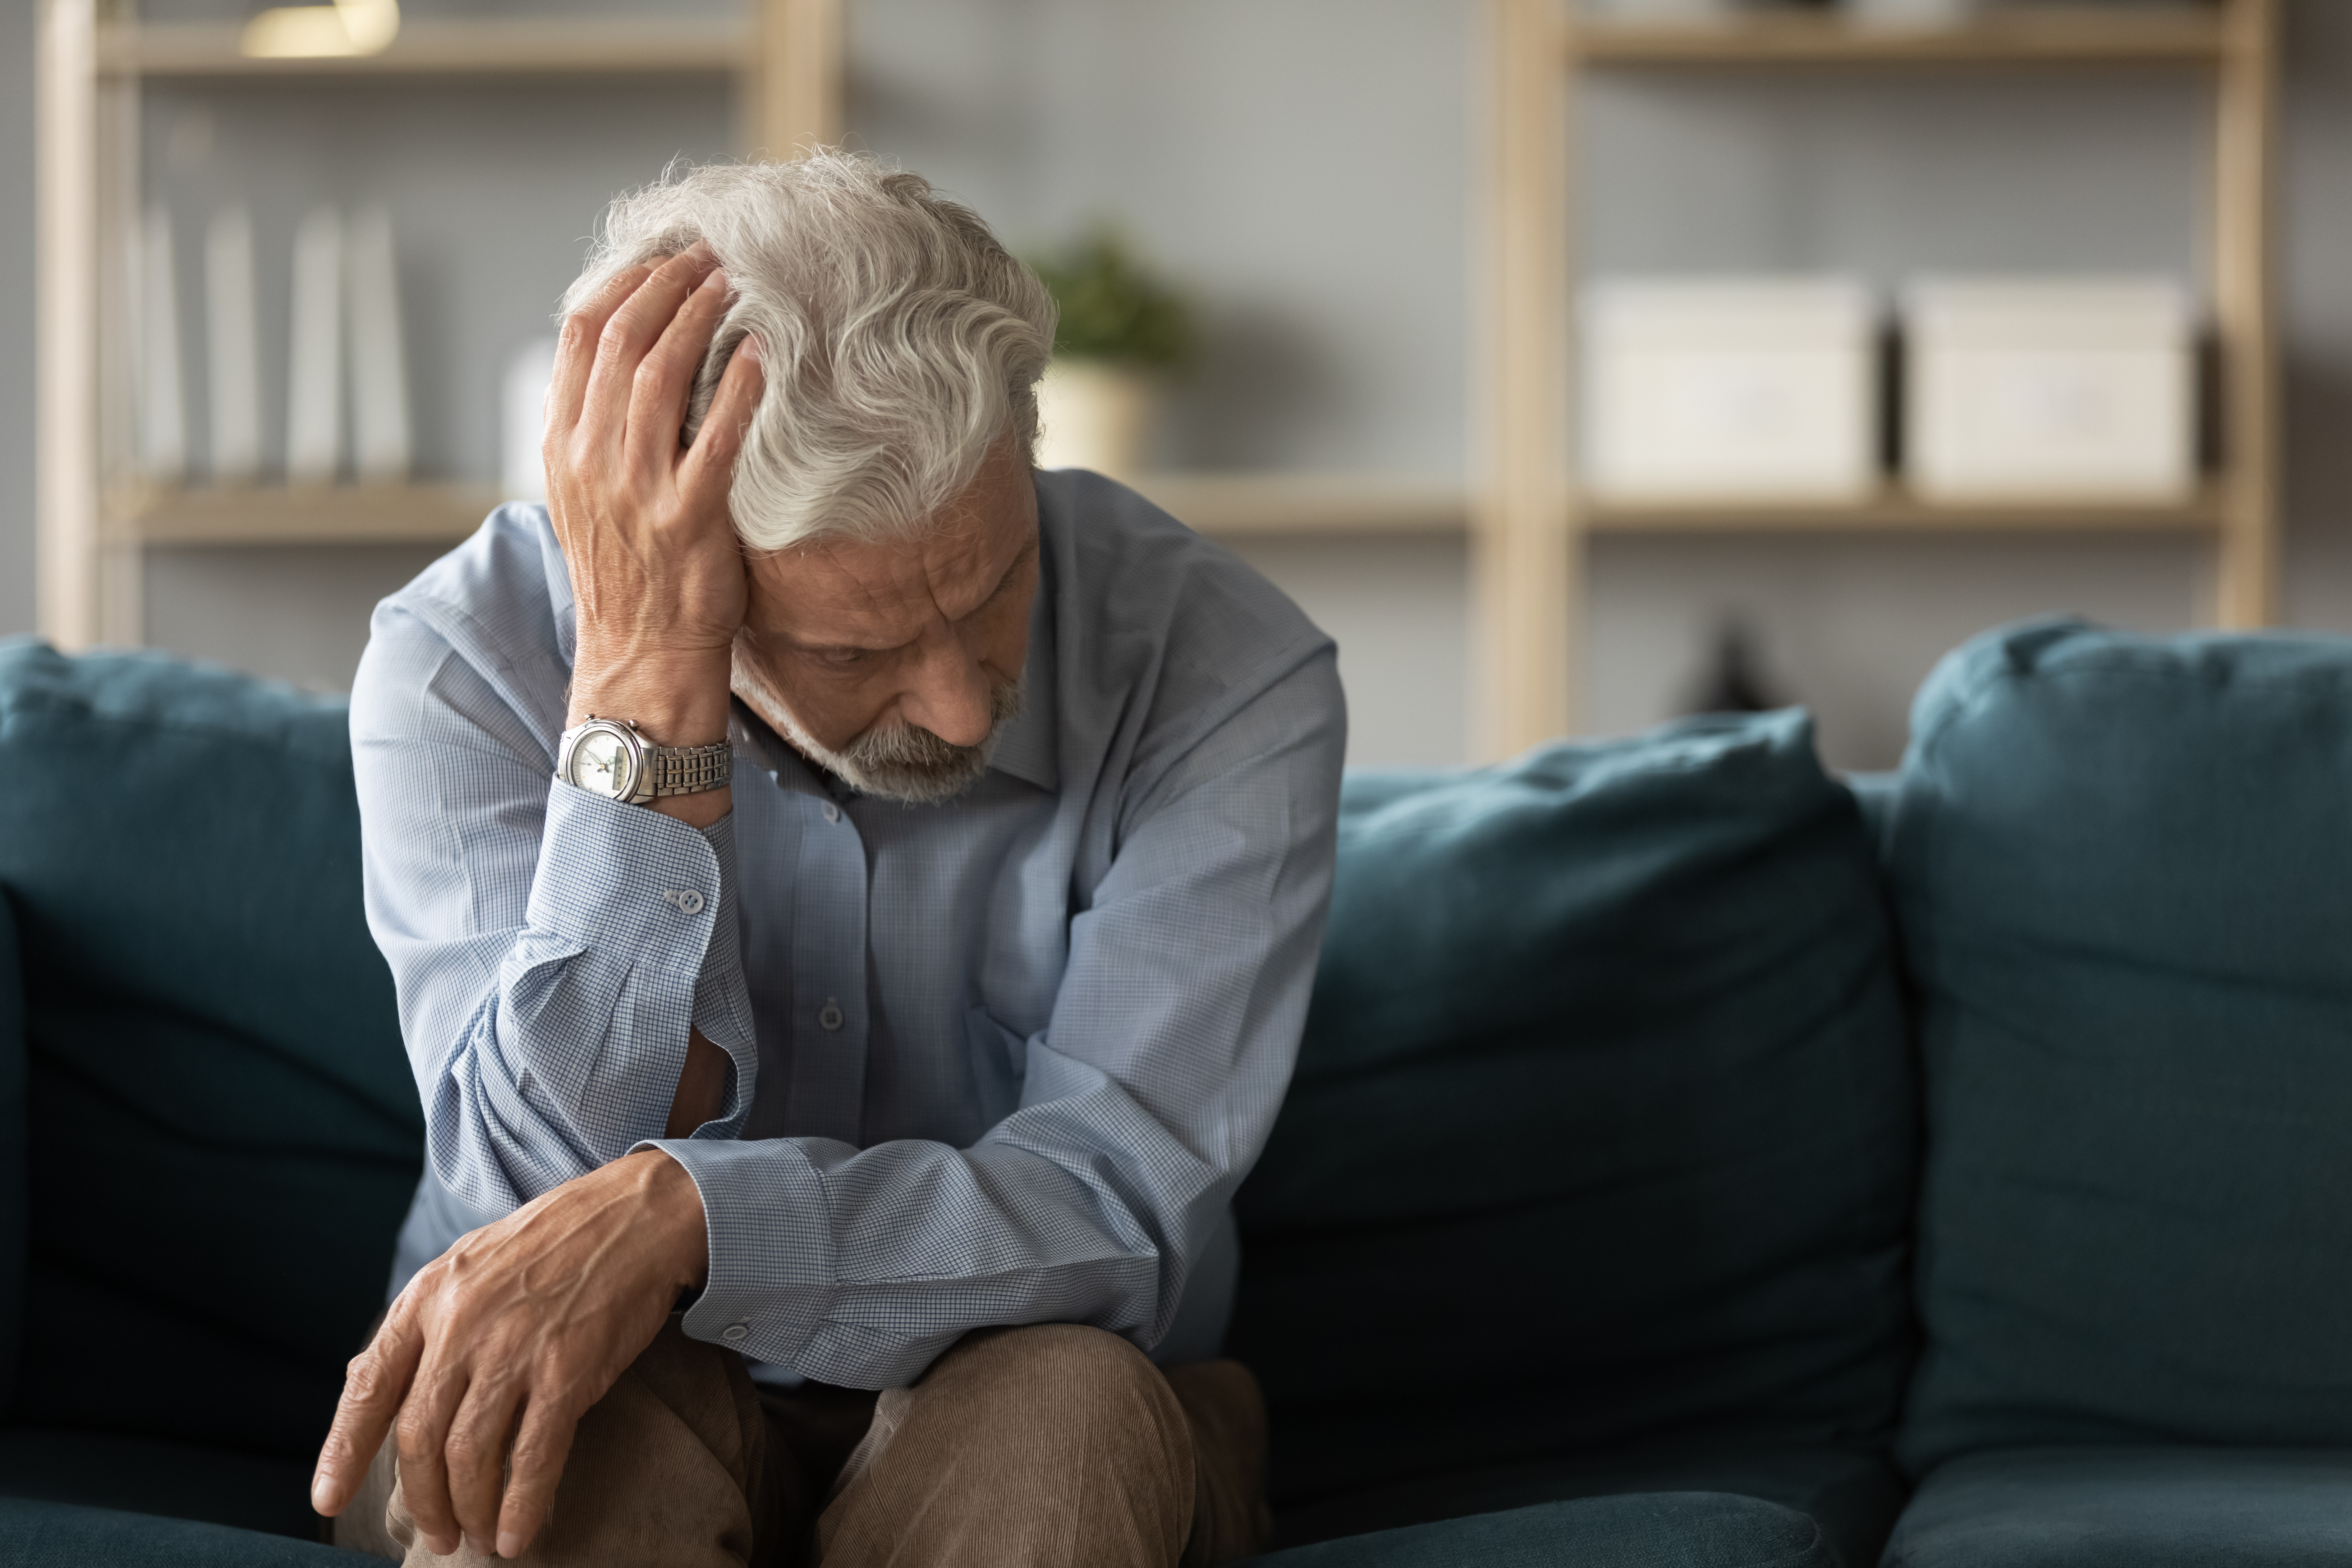 An old man holding his head looking upset | Source: Shutterstock